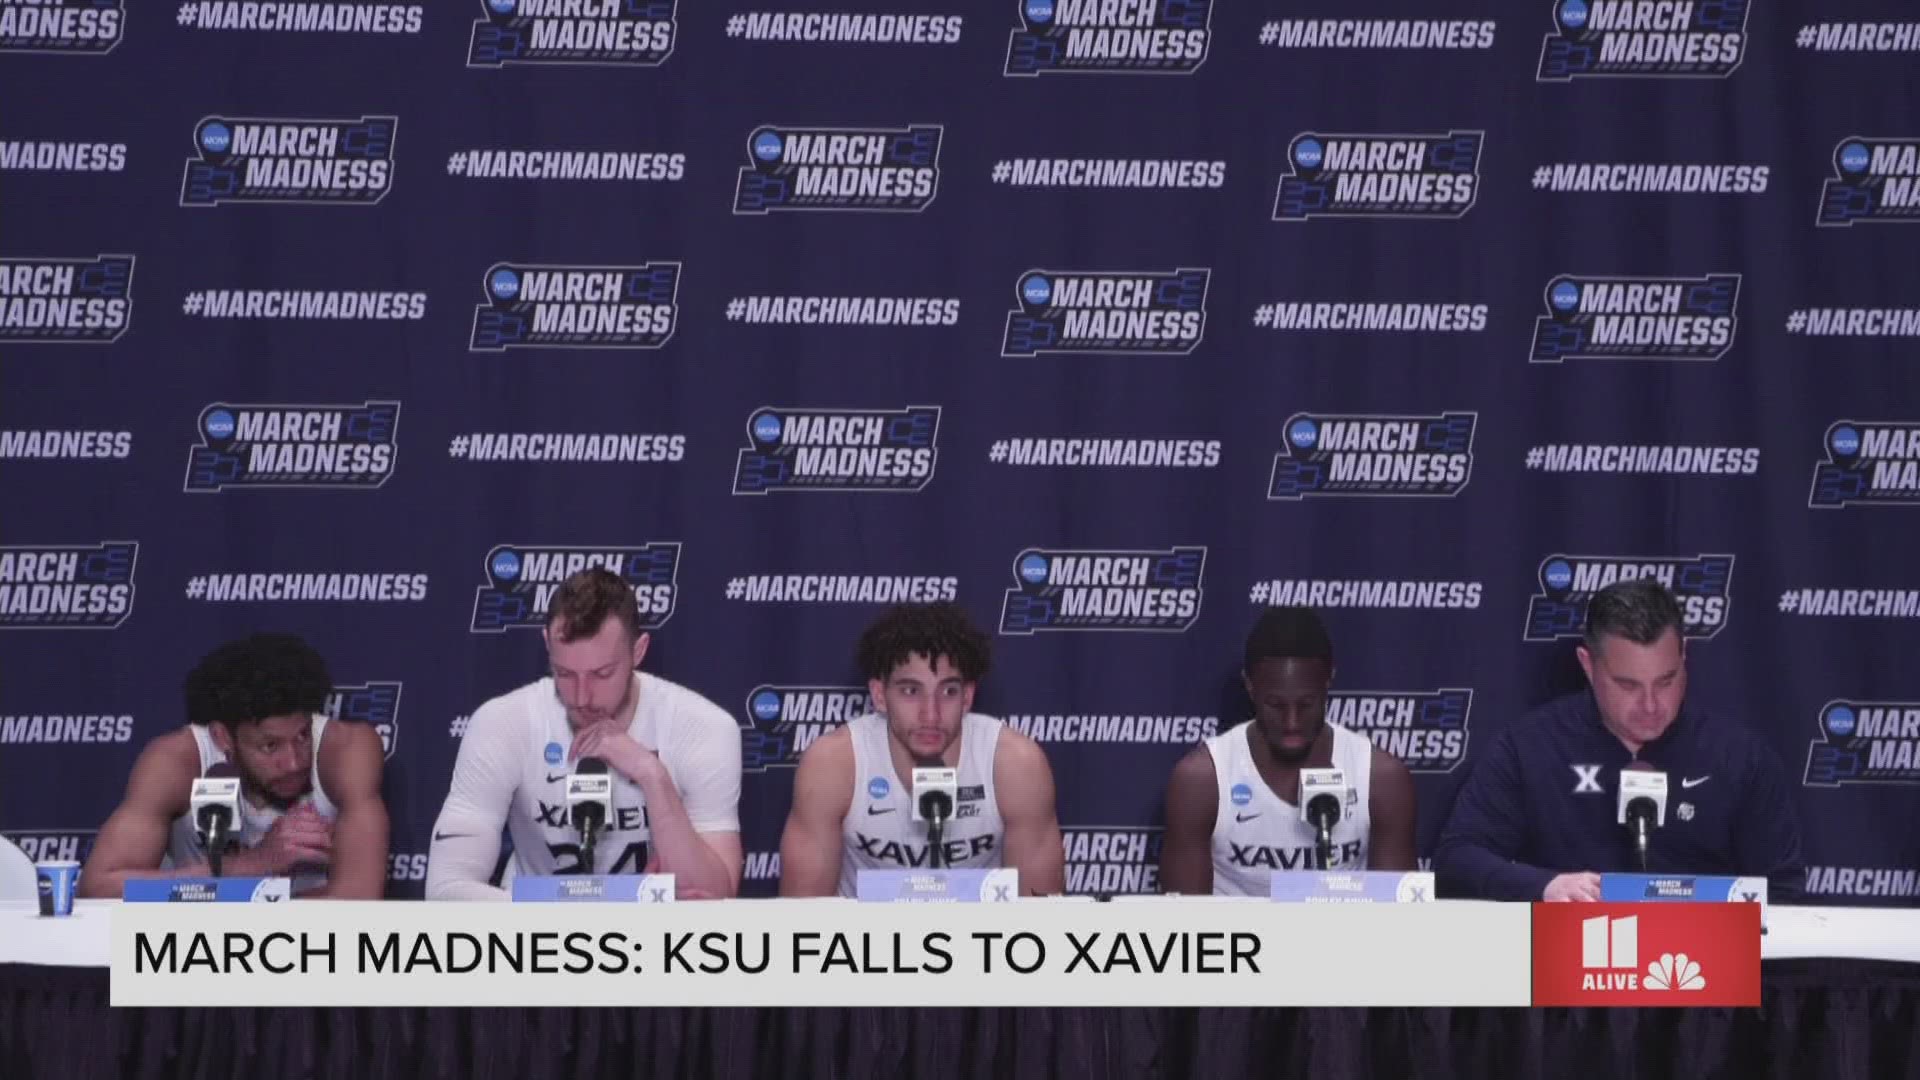 Xavier beat the Owls 72-67 in the first round of the tournament in Greensboro, N.C.